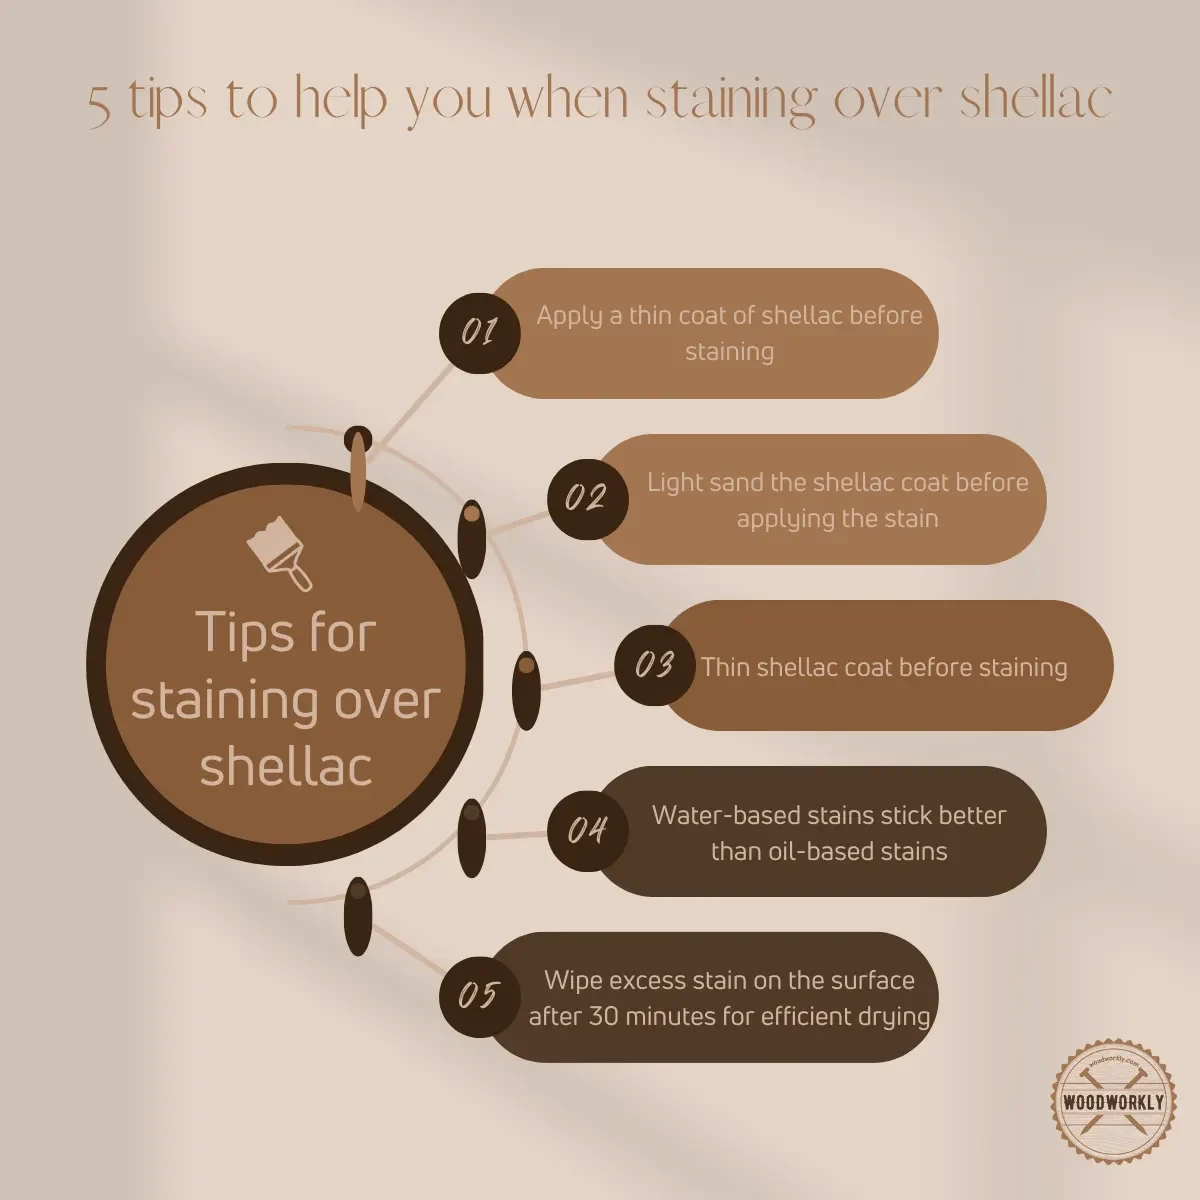 Tips for staining over shellac